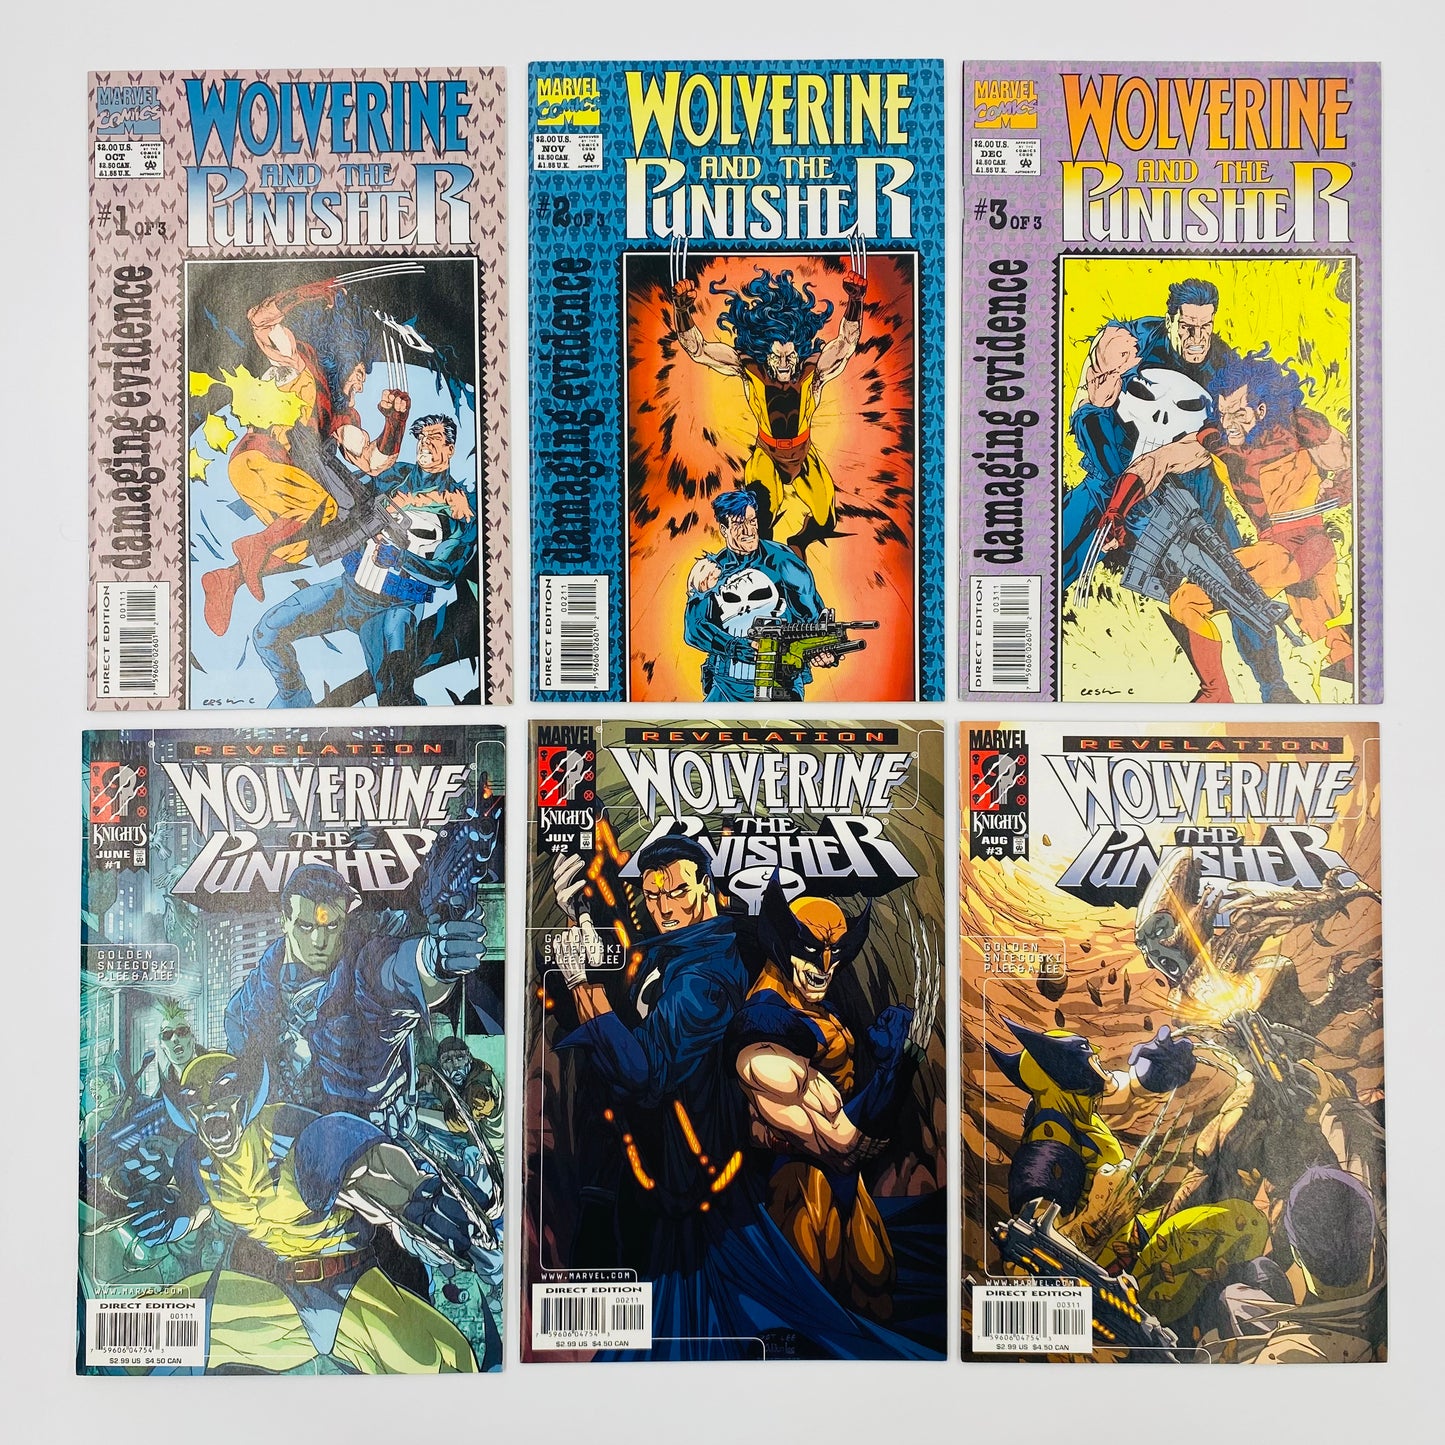 Wolverine & Punisher Fun Pack: Wolverine and the Punisher Damaging Evidence #1-3 (1993) Wolverine The Punisher Revelation #1-4 (1999) Wolverine Punisher #1-5 (2004) Marvel/Marvel Knights